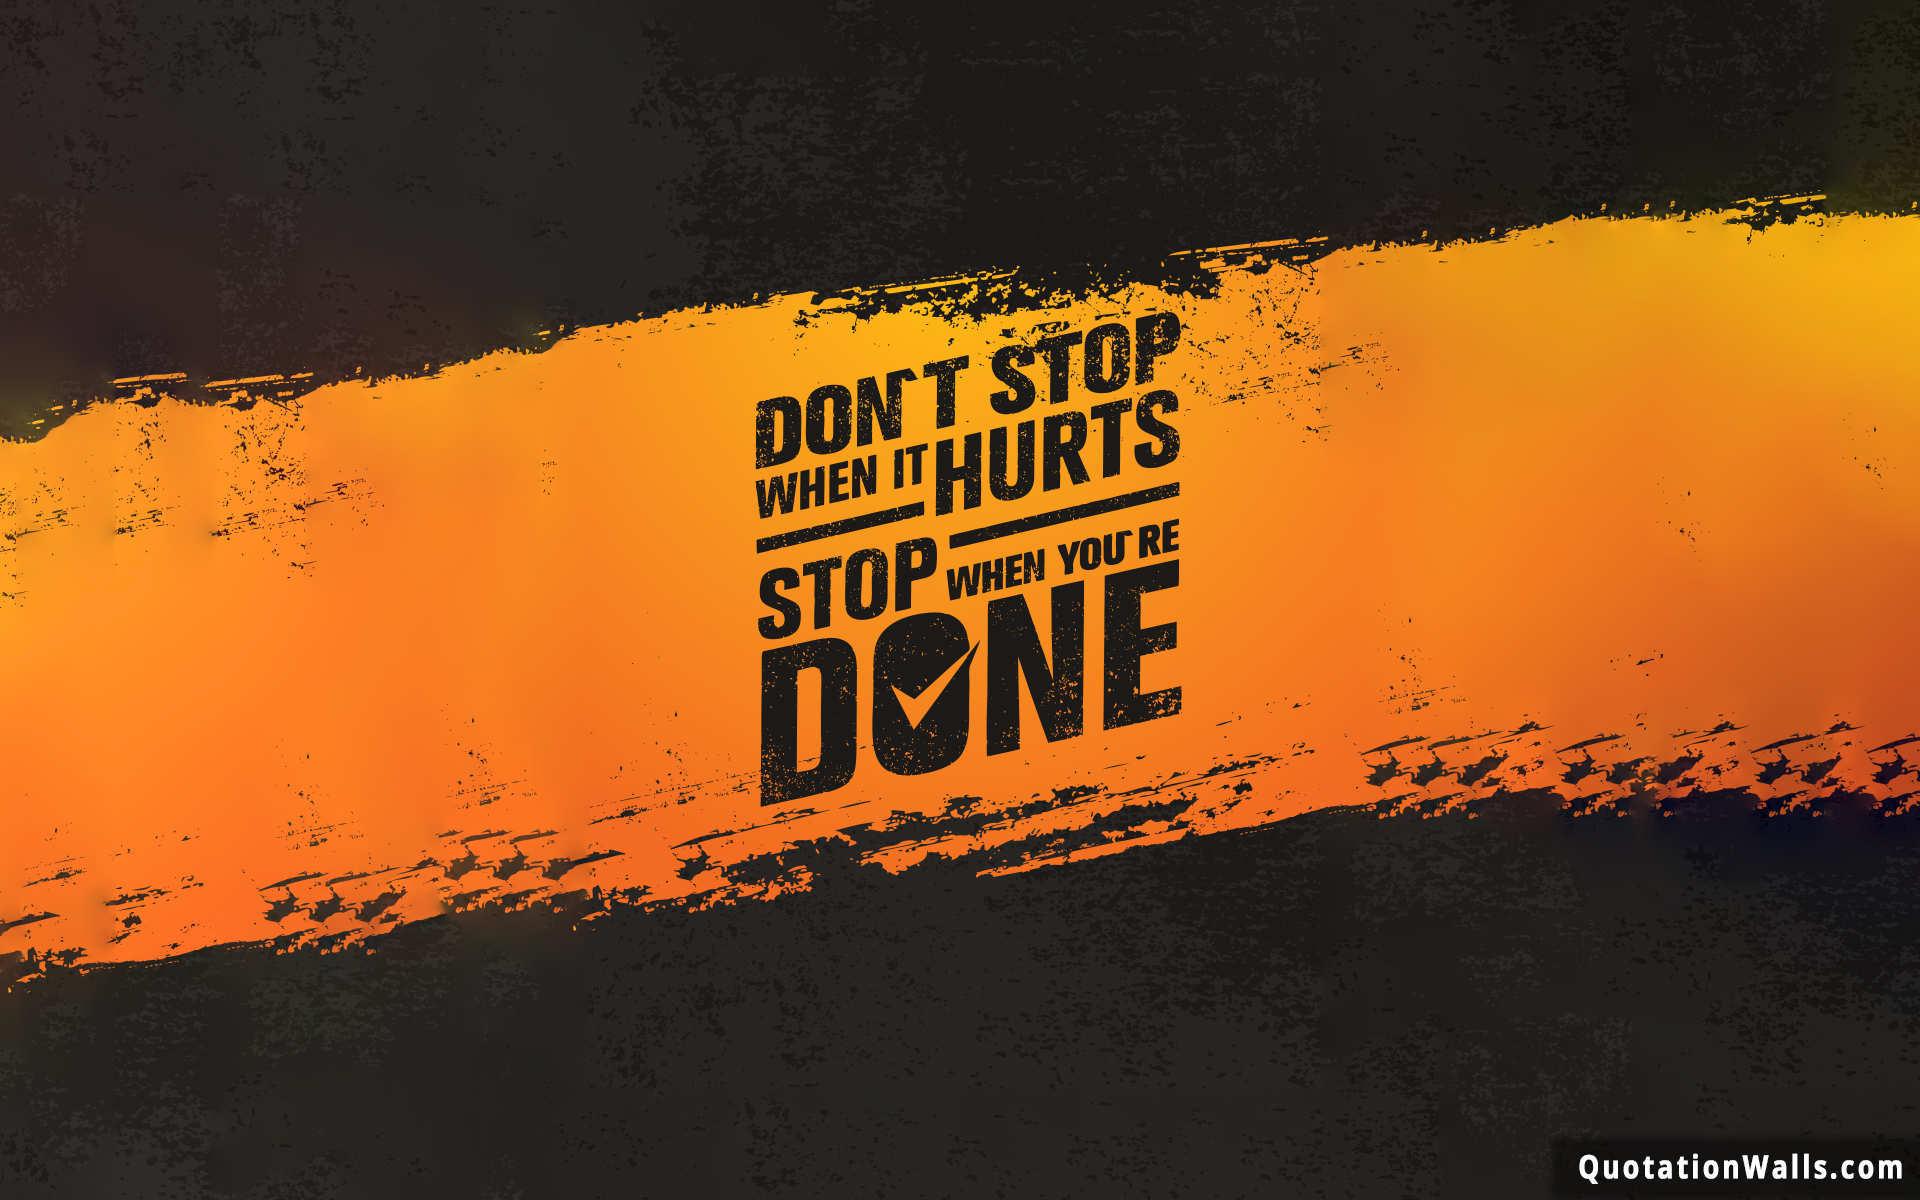 Never Quit Wallpapers Wallpaper Cave